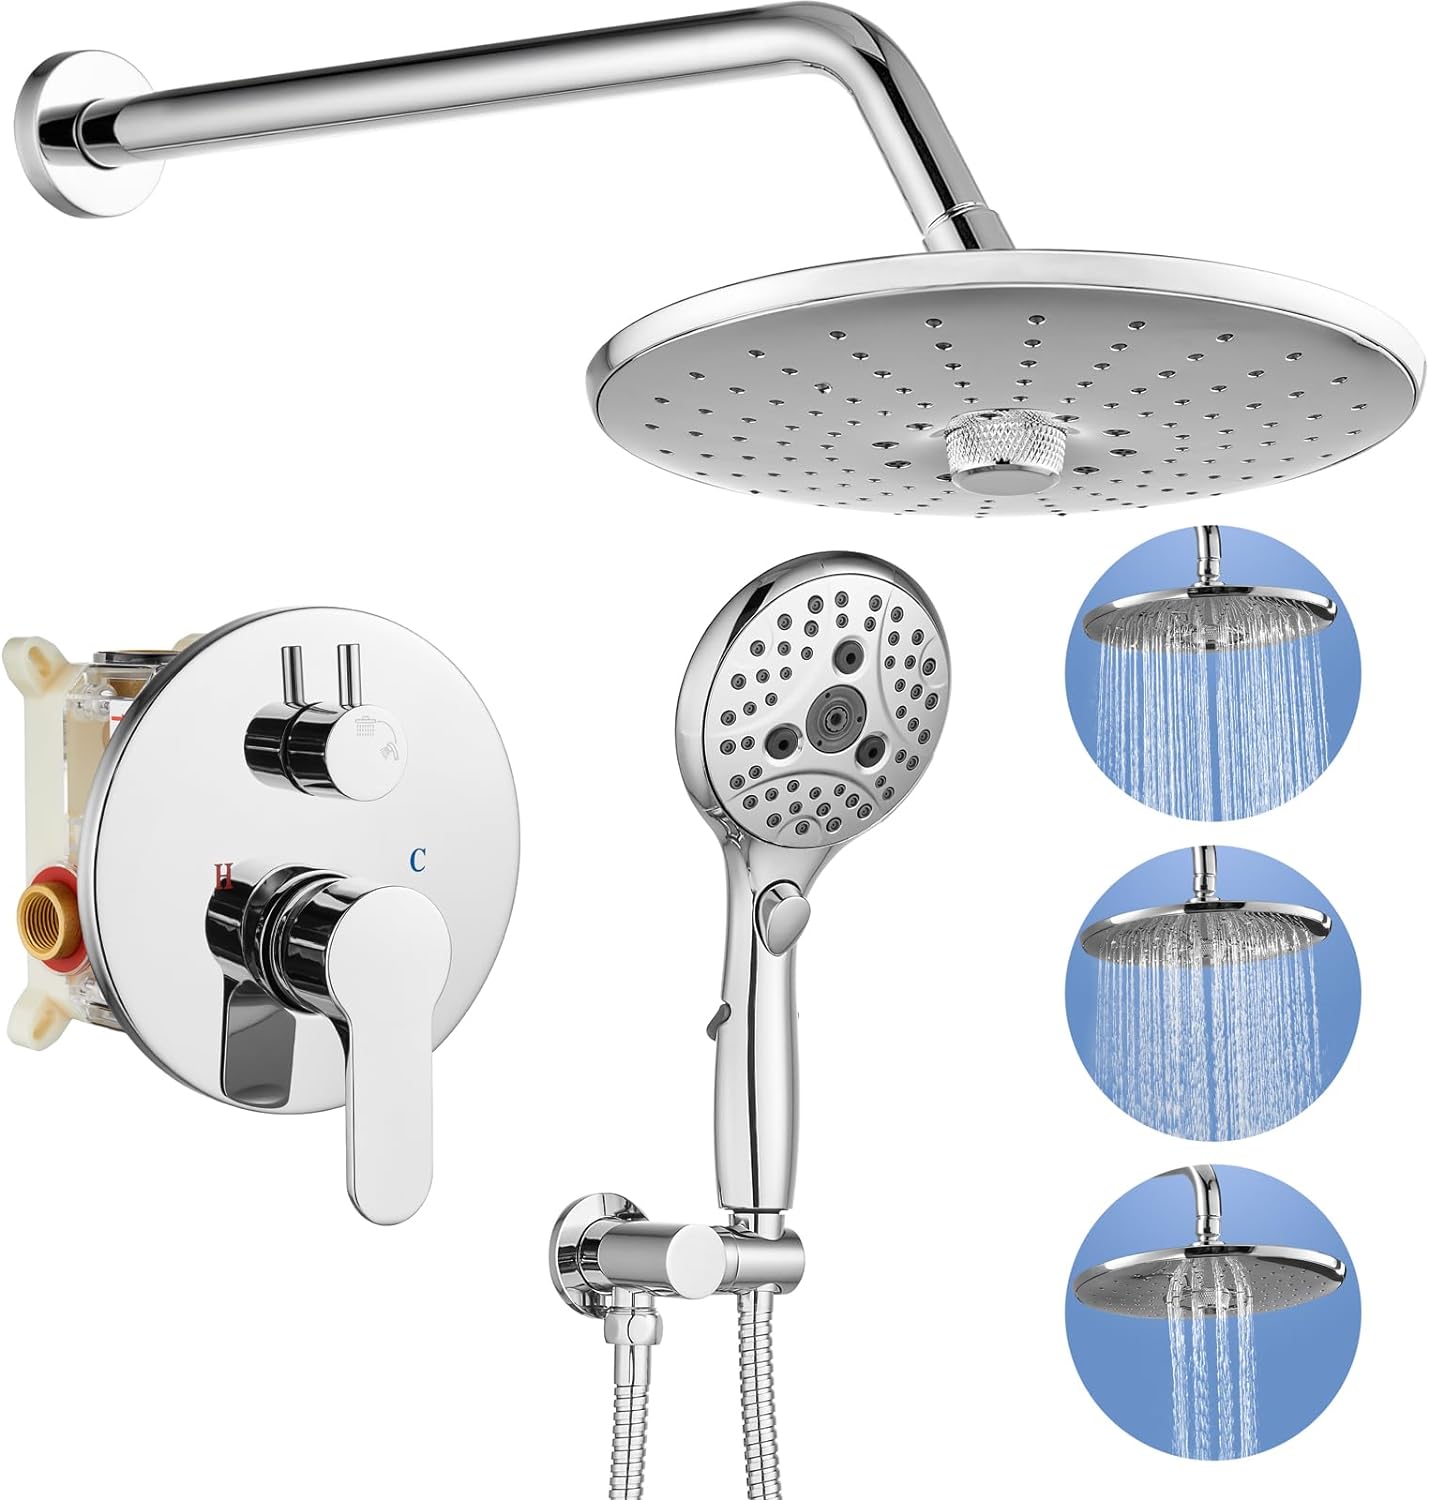 gotonovo Shower Trim Kit Polished Chrome 10 inch 3 Modes Round Rainfall Shower Head Wall Mounted 6-Functions ABS Handheld Spray Shower System Pressure Balanced Rough-in Valve and Trim Included